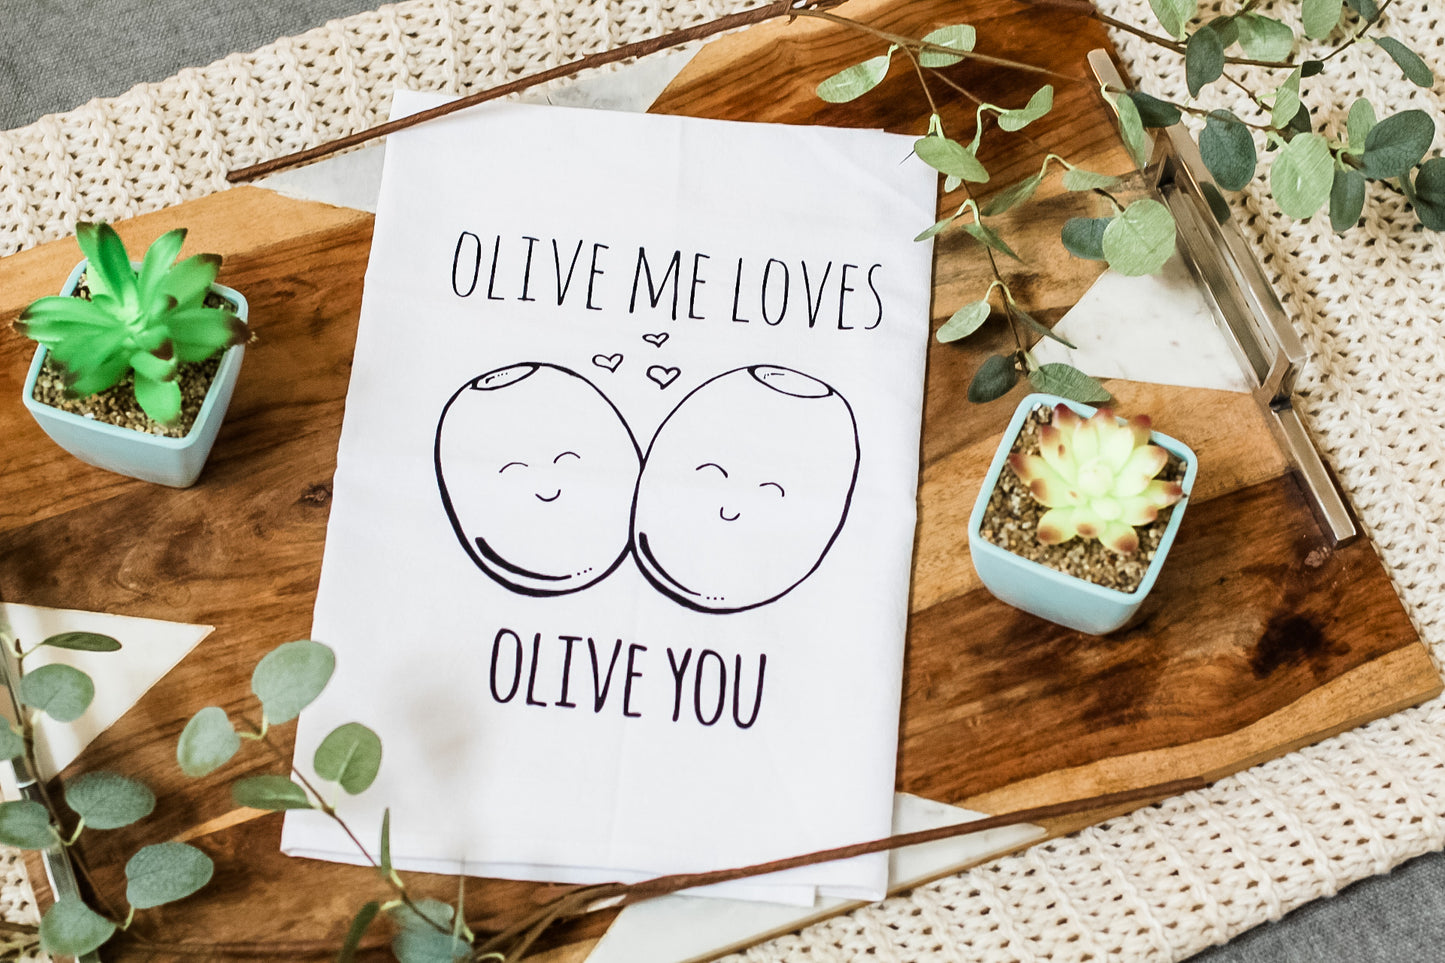 Olive Me Loves Olive You Dish Towel - White Or Gray - MoonlightMakers